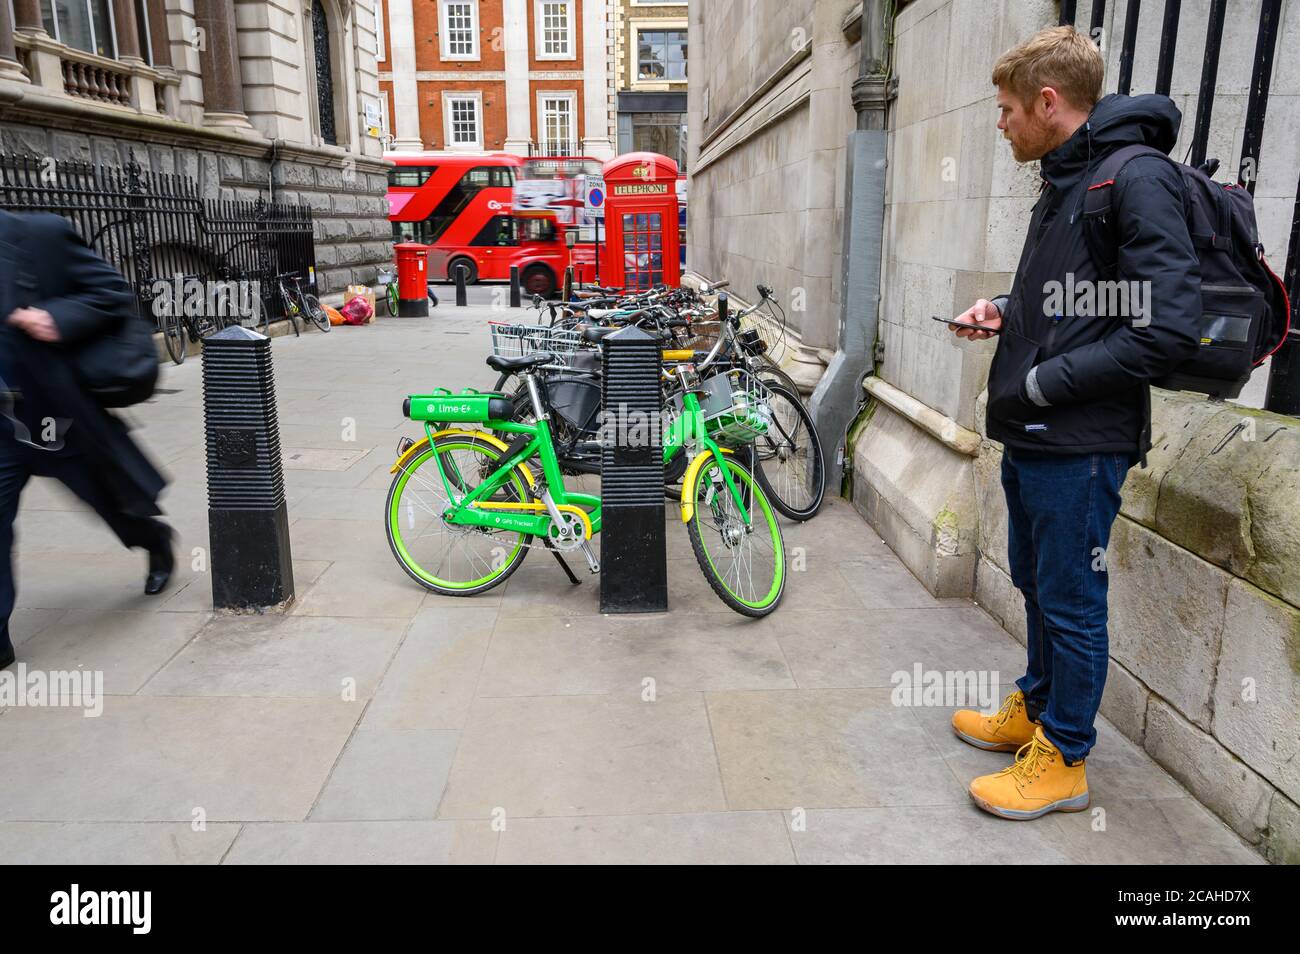 LONDON - FEBRUARY 04, 2020: A man operating a smartphone and looking at a Lime electric assist rental bike. Red London Double Decker Buses passing in Stock Photo